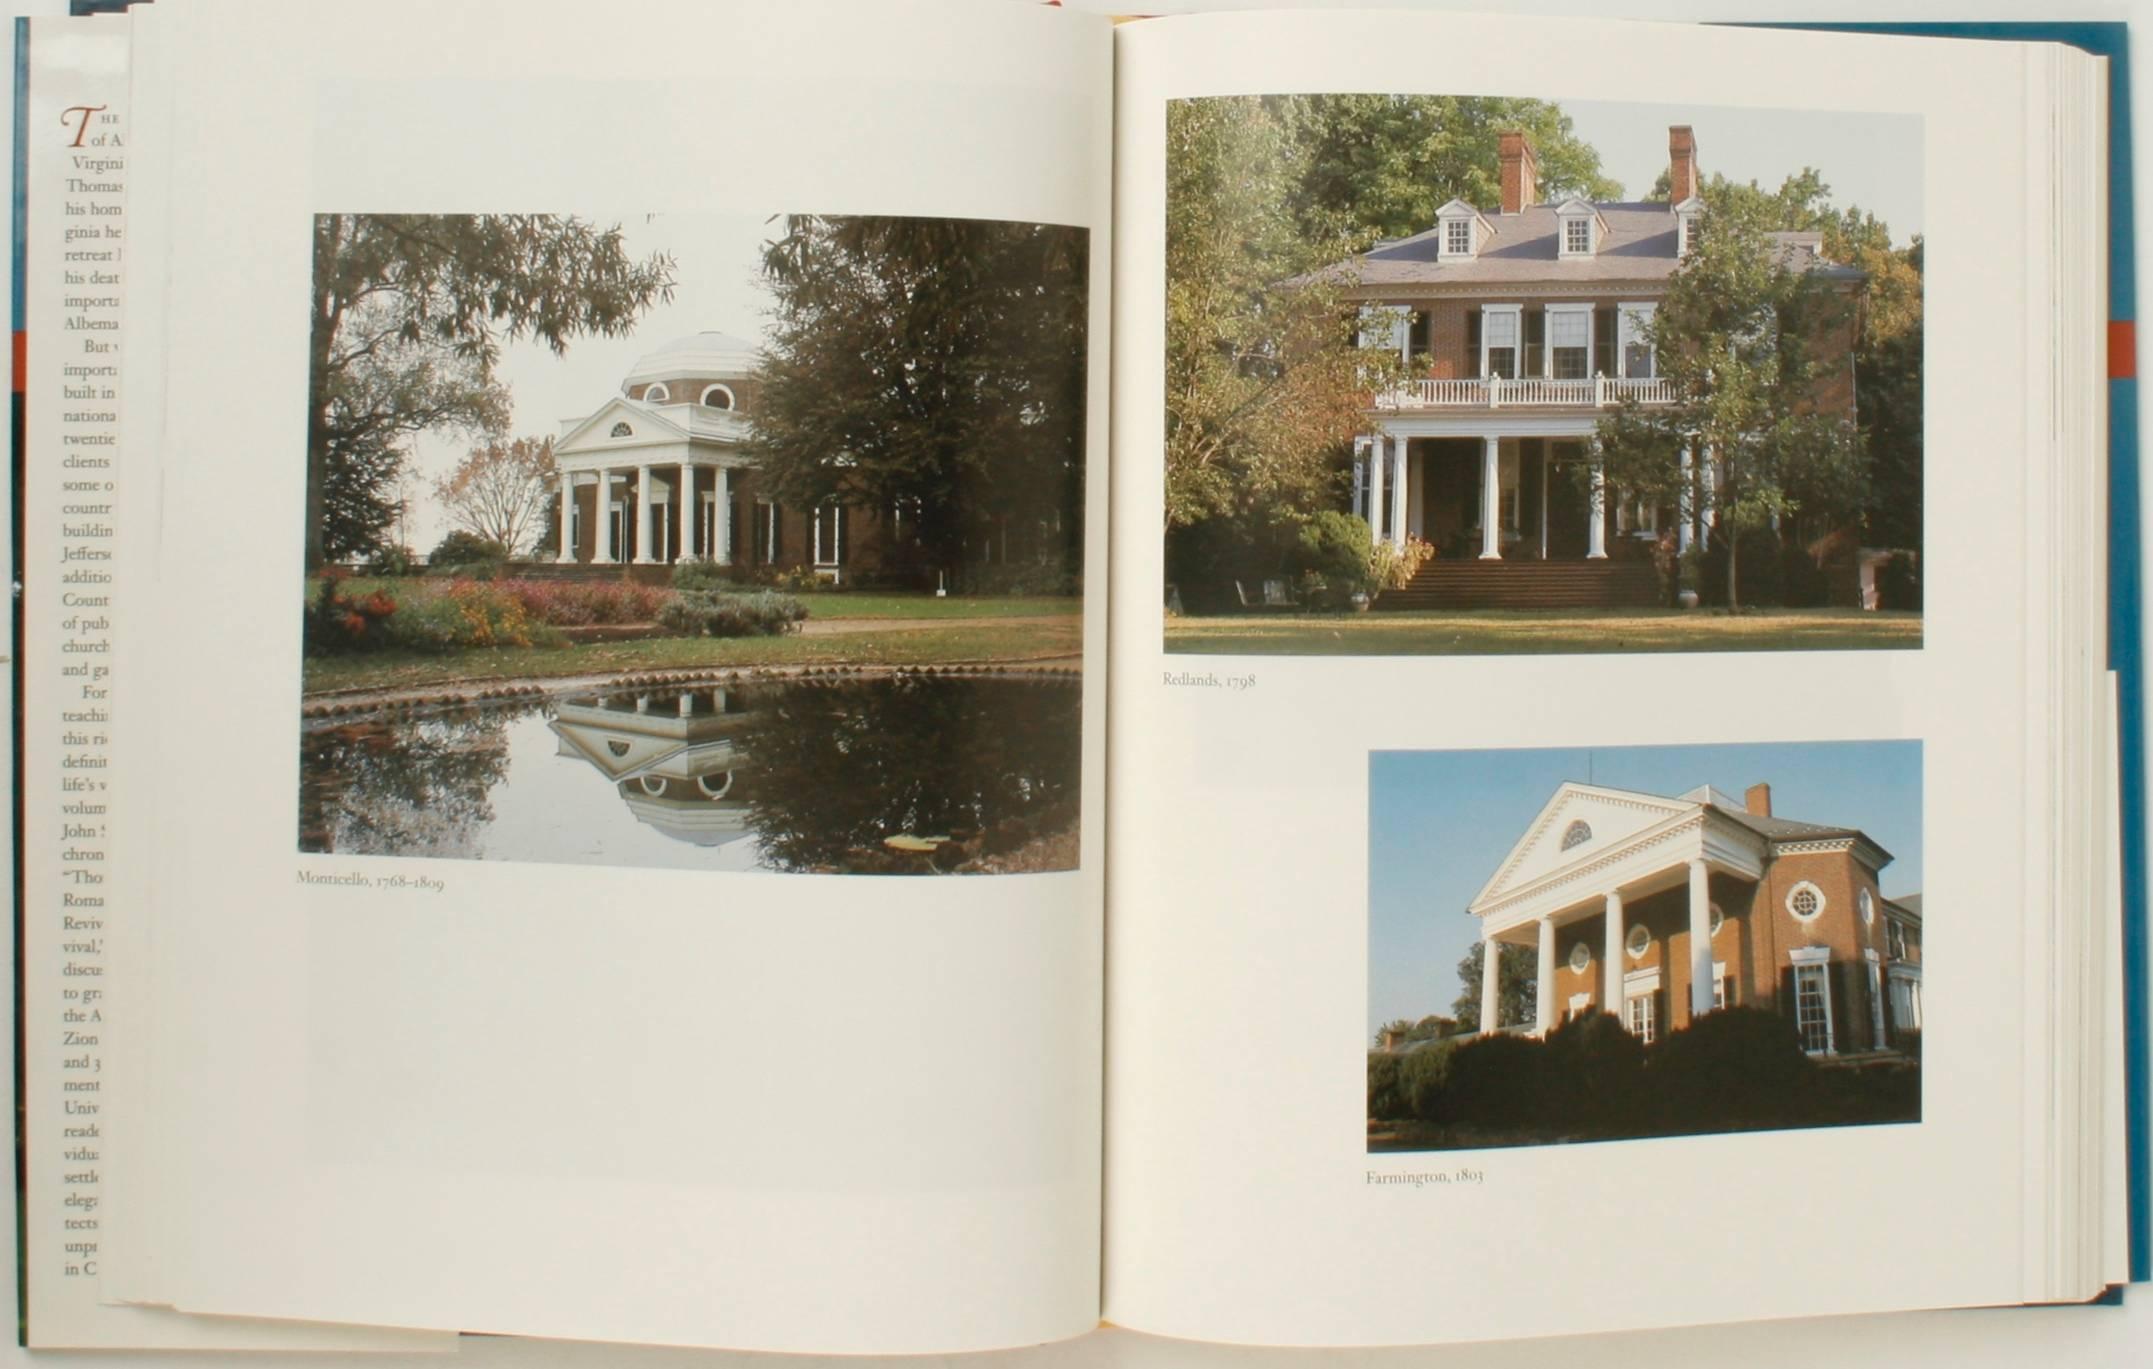 Architecture of Jefferson Country: Charlottesville and Albemarle County, VA 2